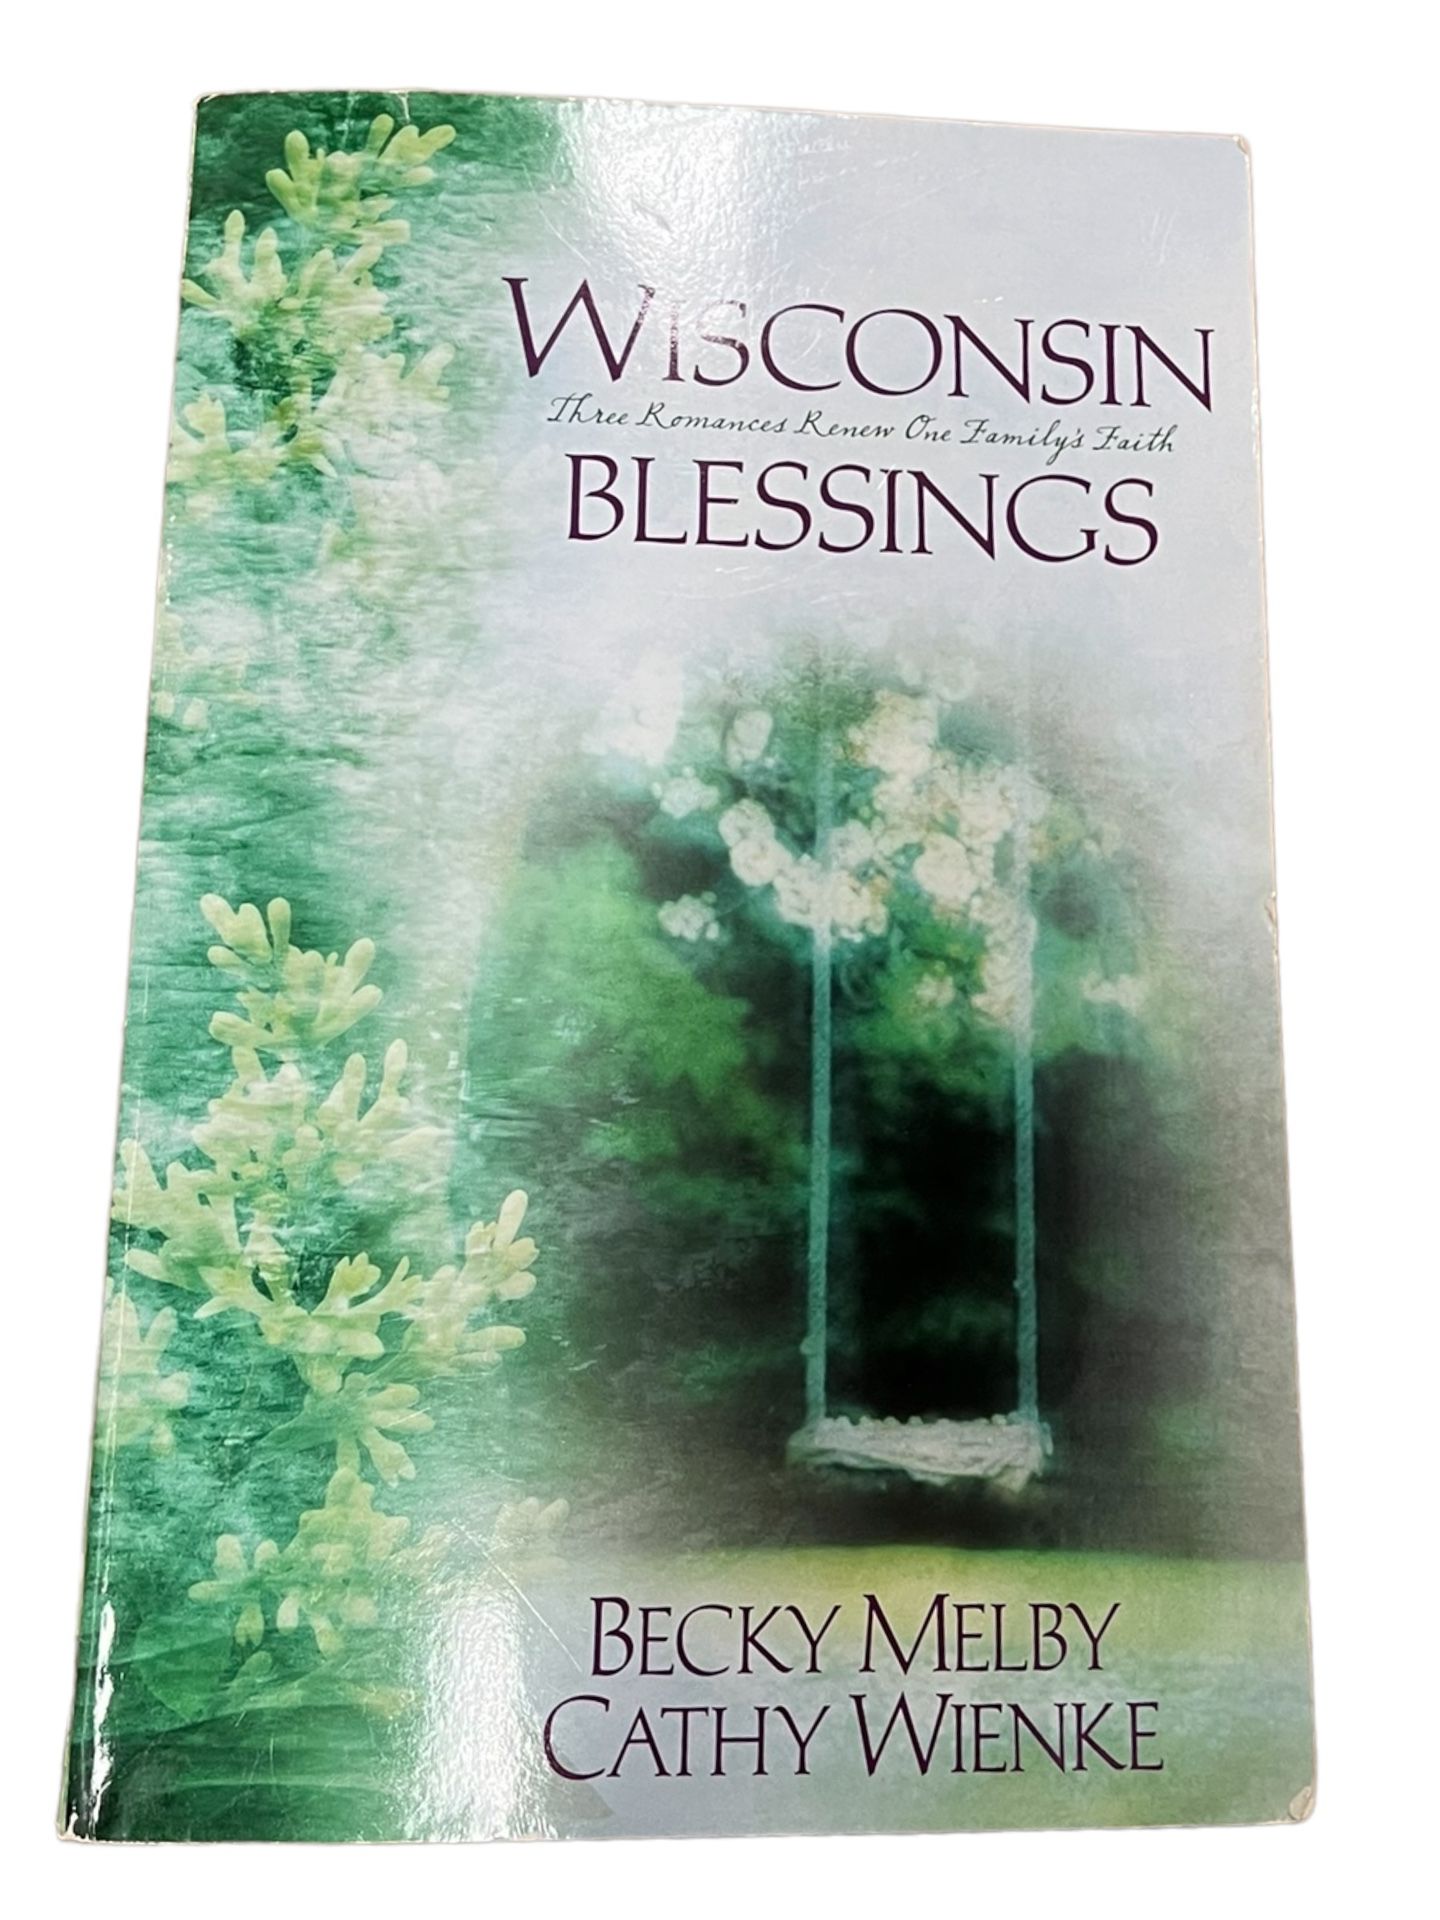 This cloth book titled "Wisconsin Blessings" by Becky Melbe is a beautiful addition to any collection. It contains three inspiring stories: "Beauty fo